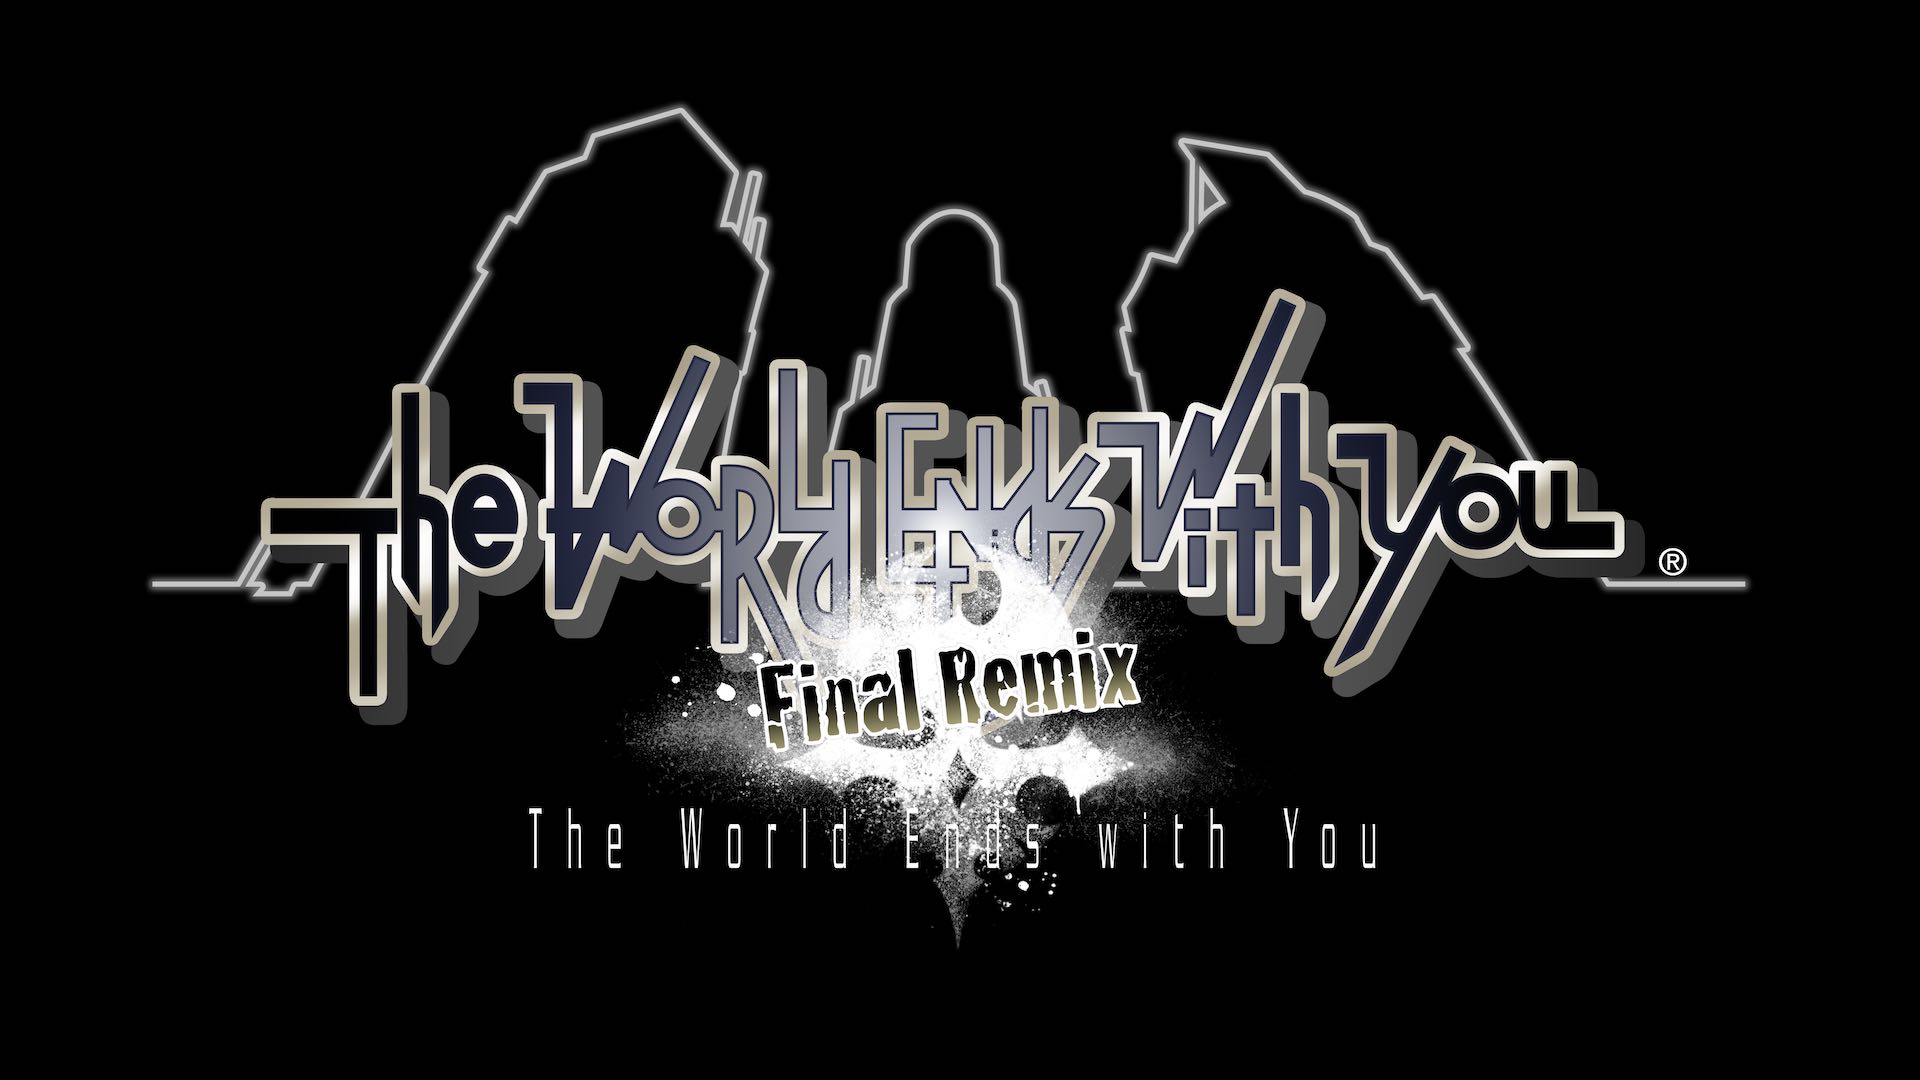 the-world-ends-with-you-final-remix-logo